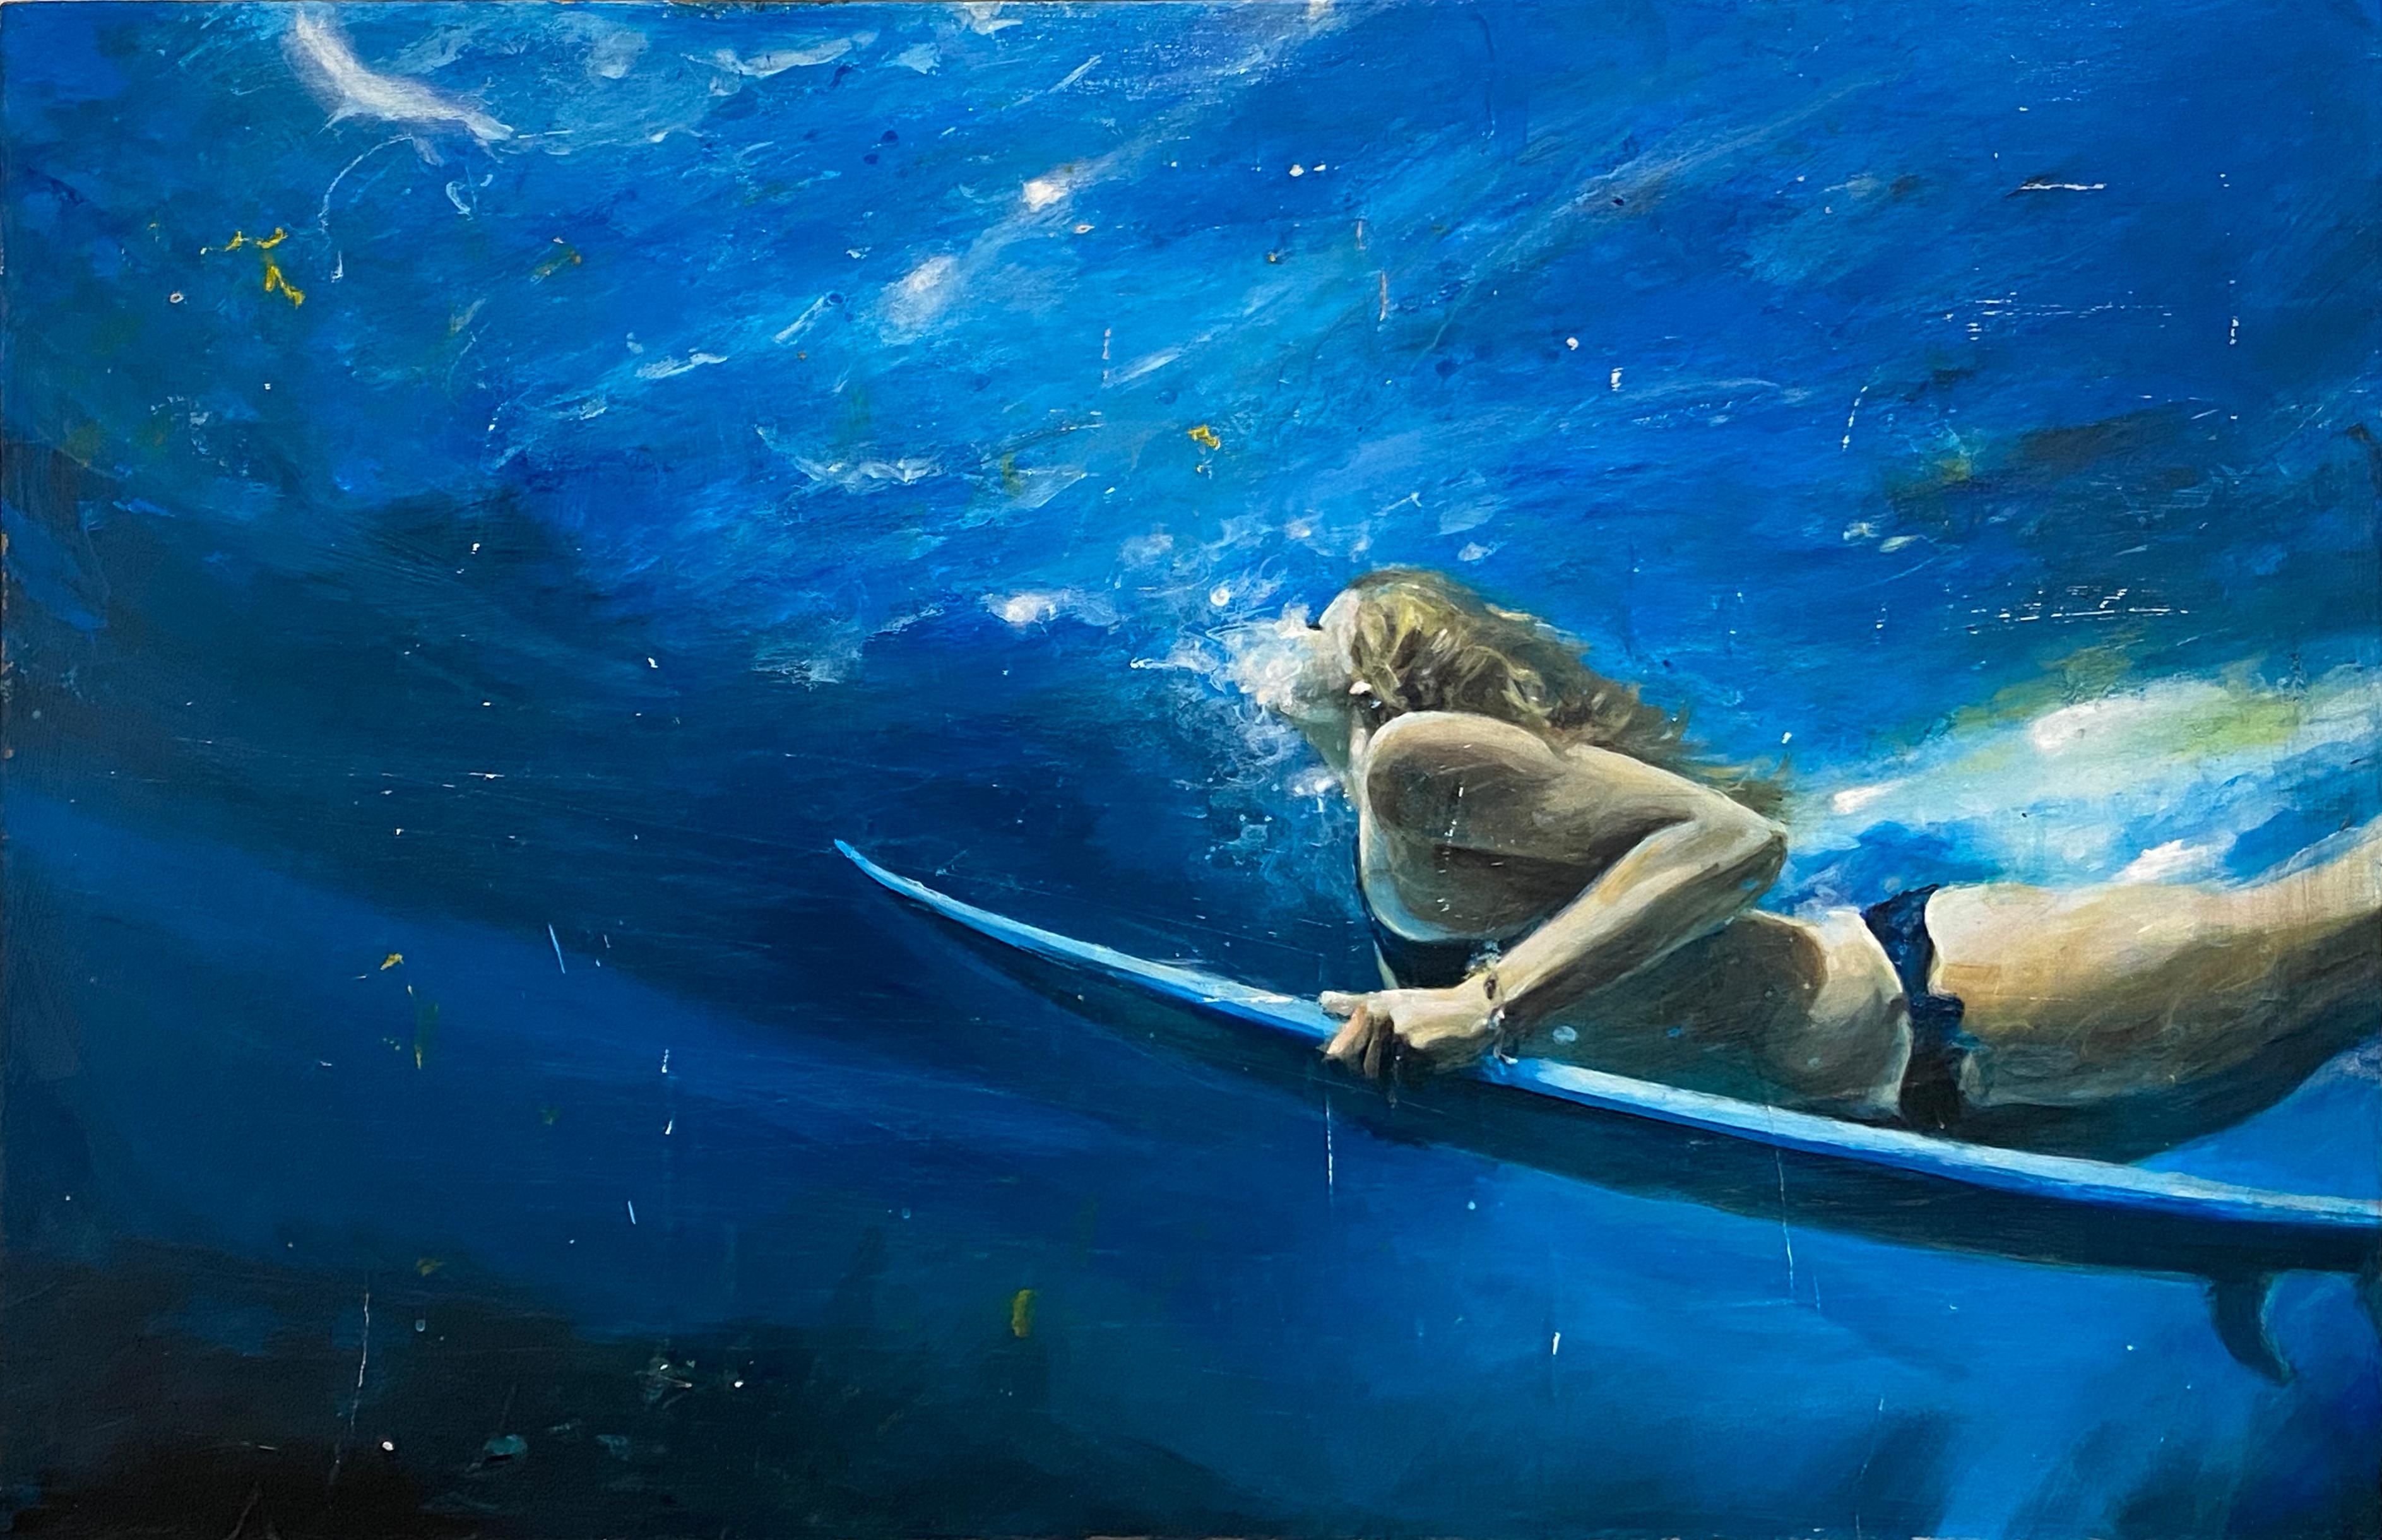 Brooks (Surfer) 2022_Greg Miller_Acrylic/Collage_Figurative/Swimmer/Waterscape